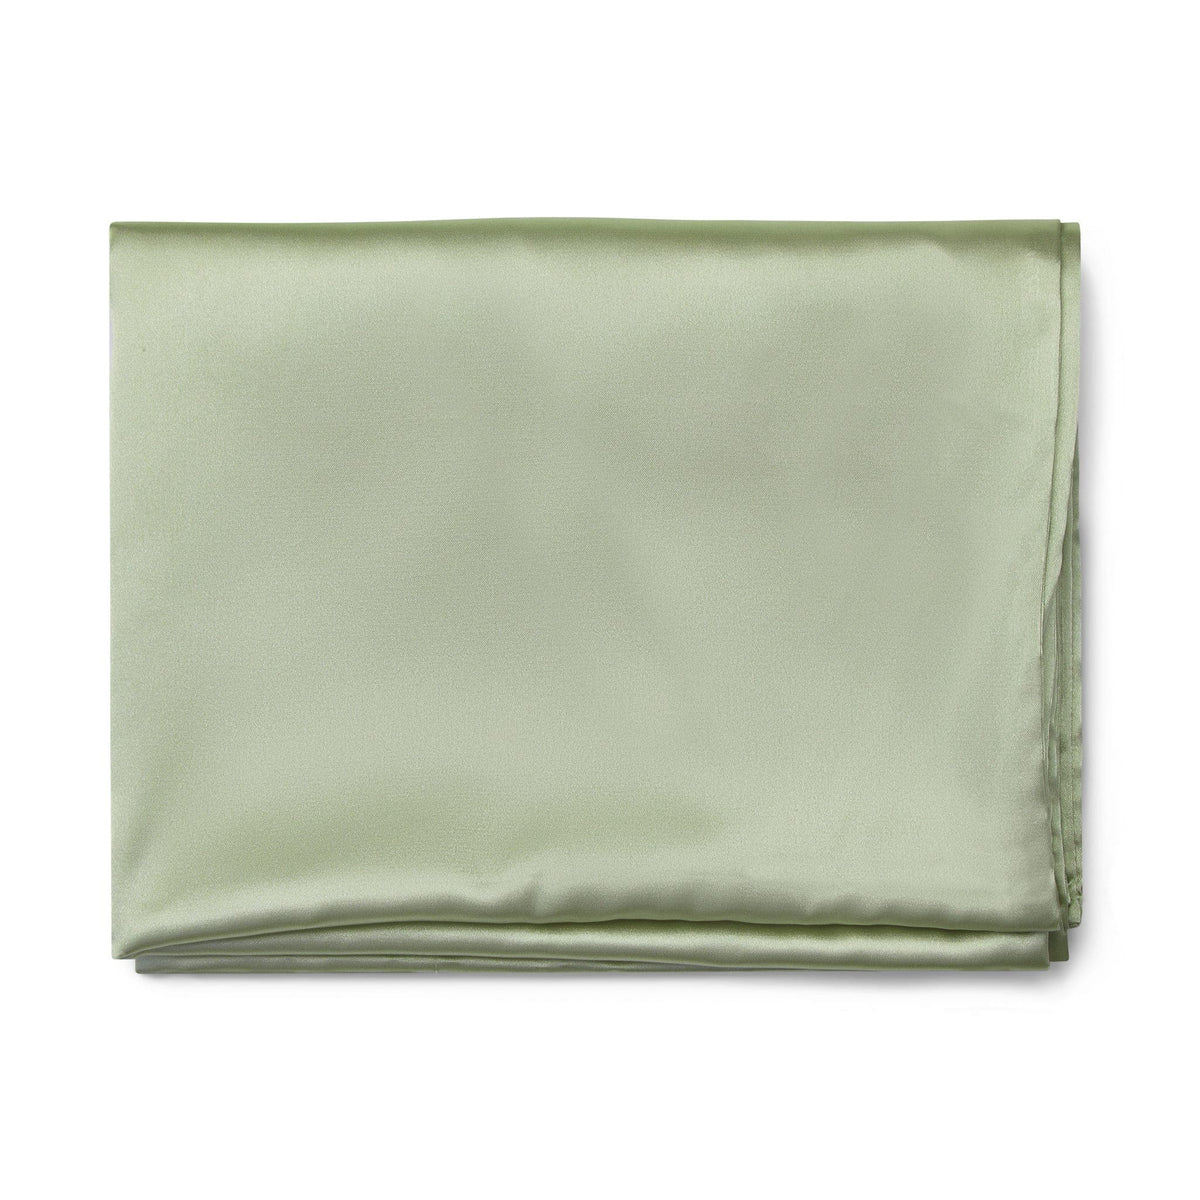 Only Curls Satin Pillowcase - Sage - Only Curls